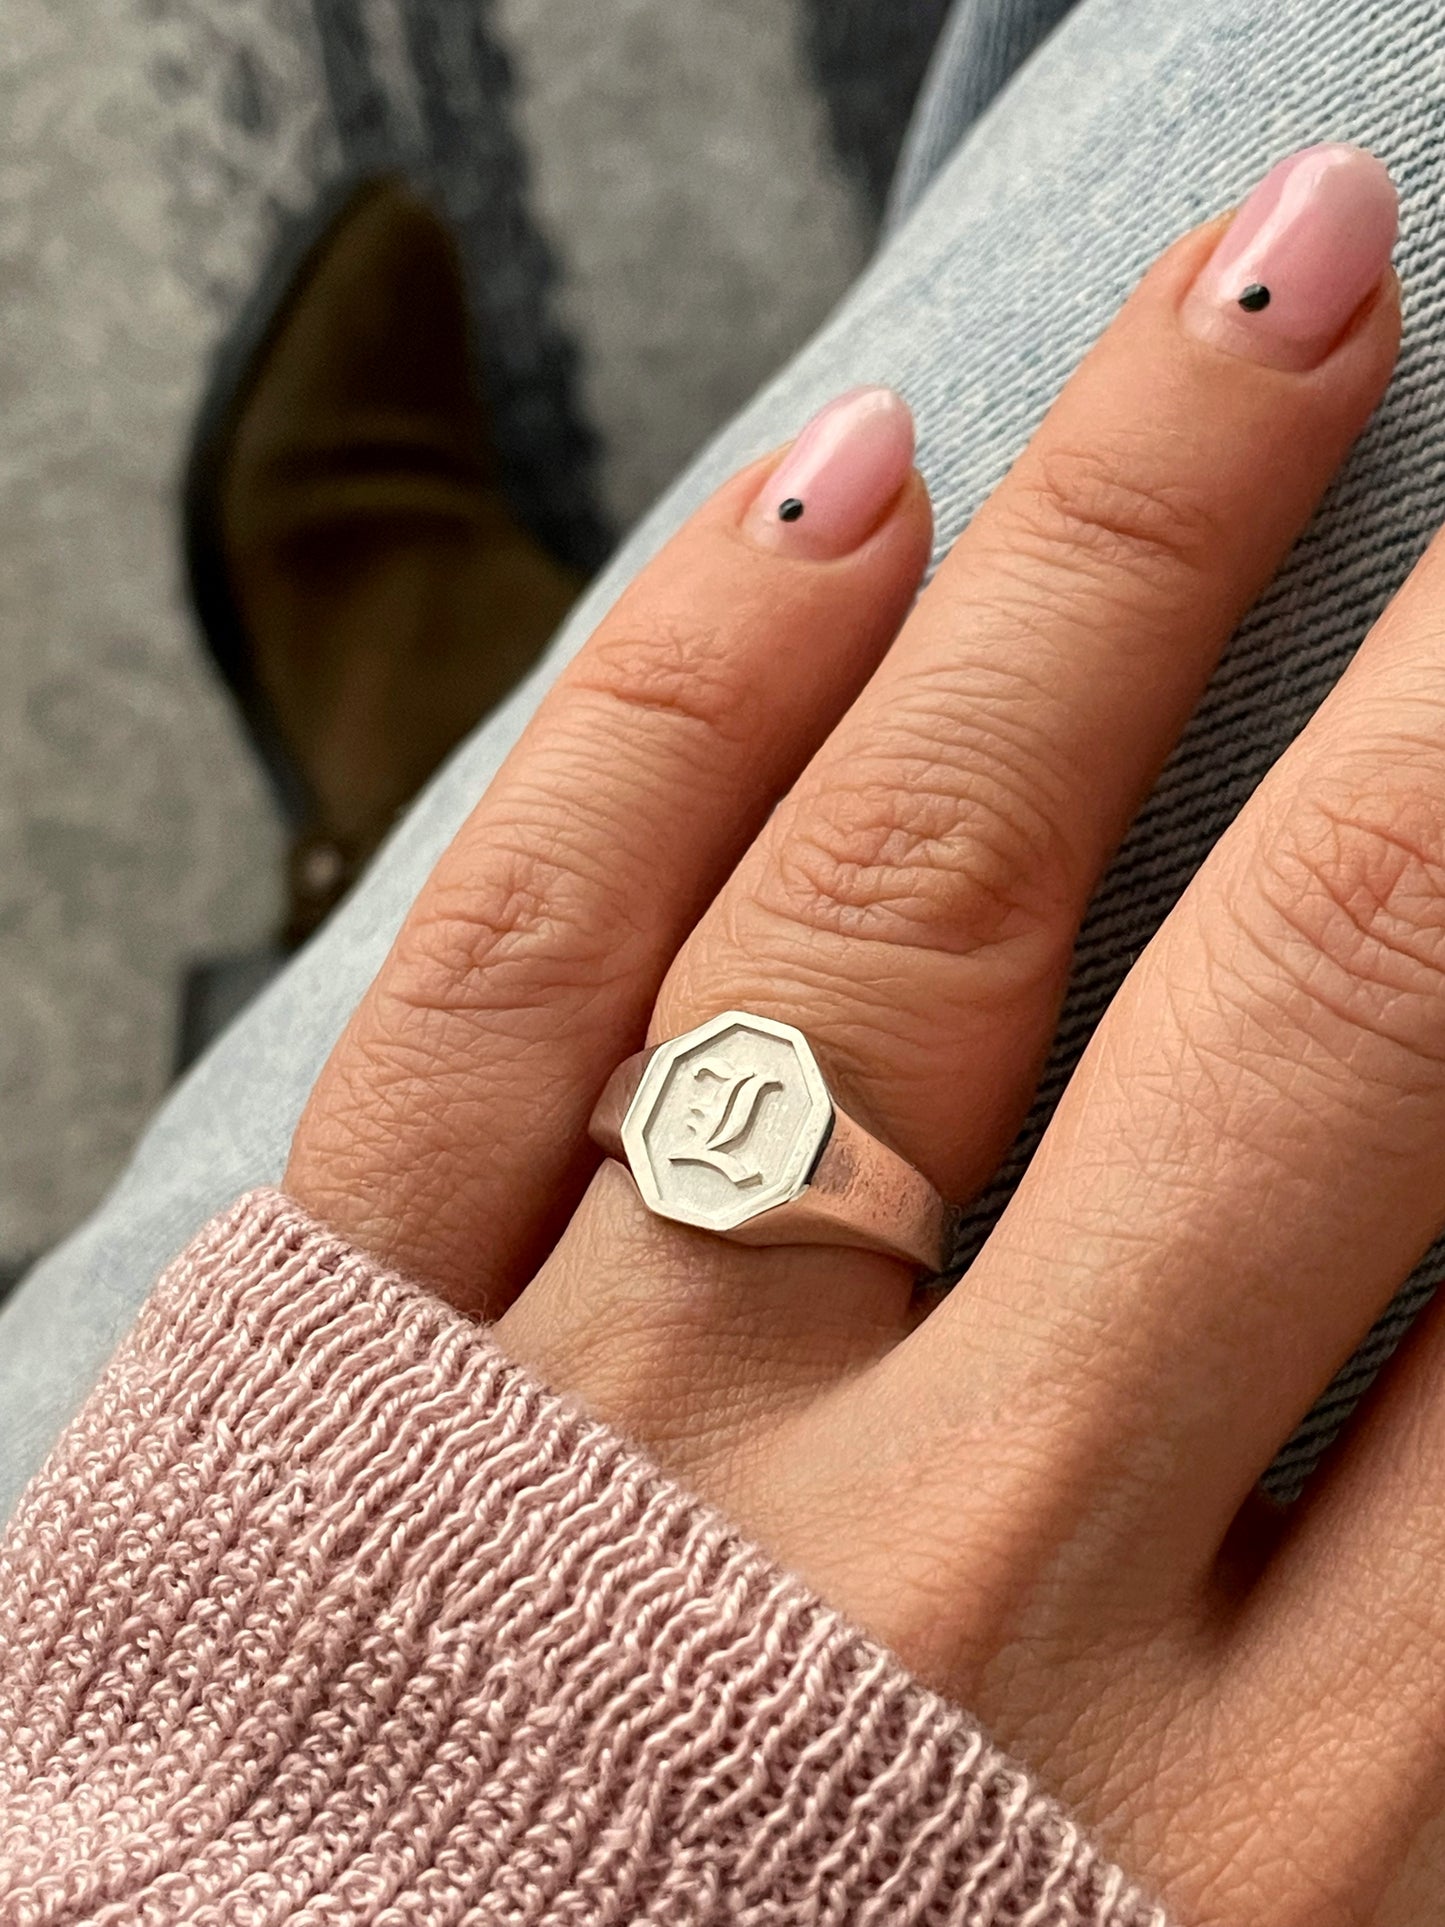 Gold Initial Signet Ring